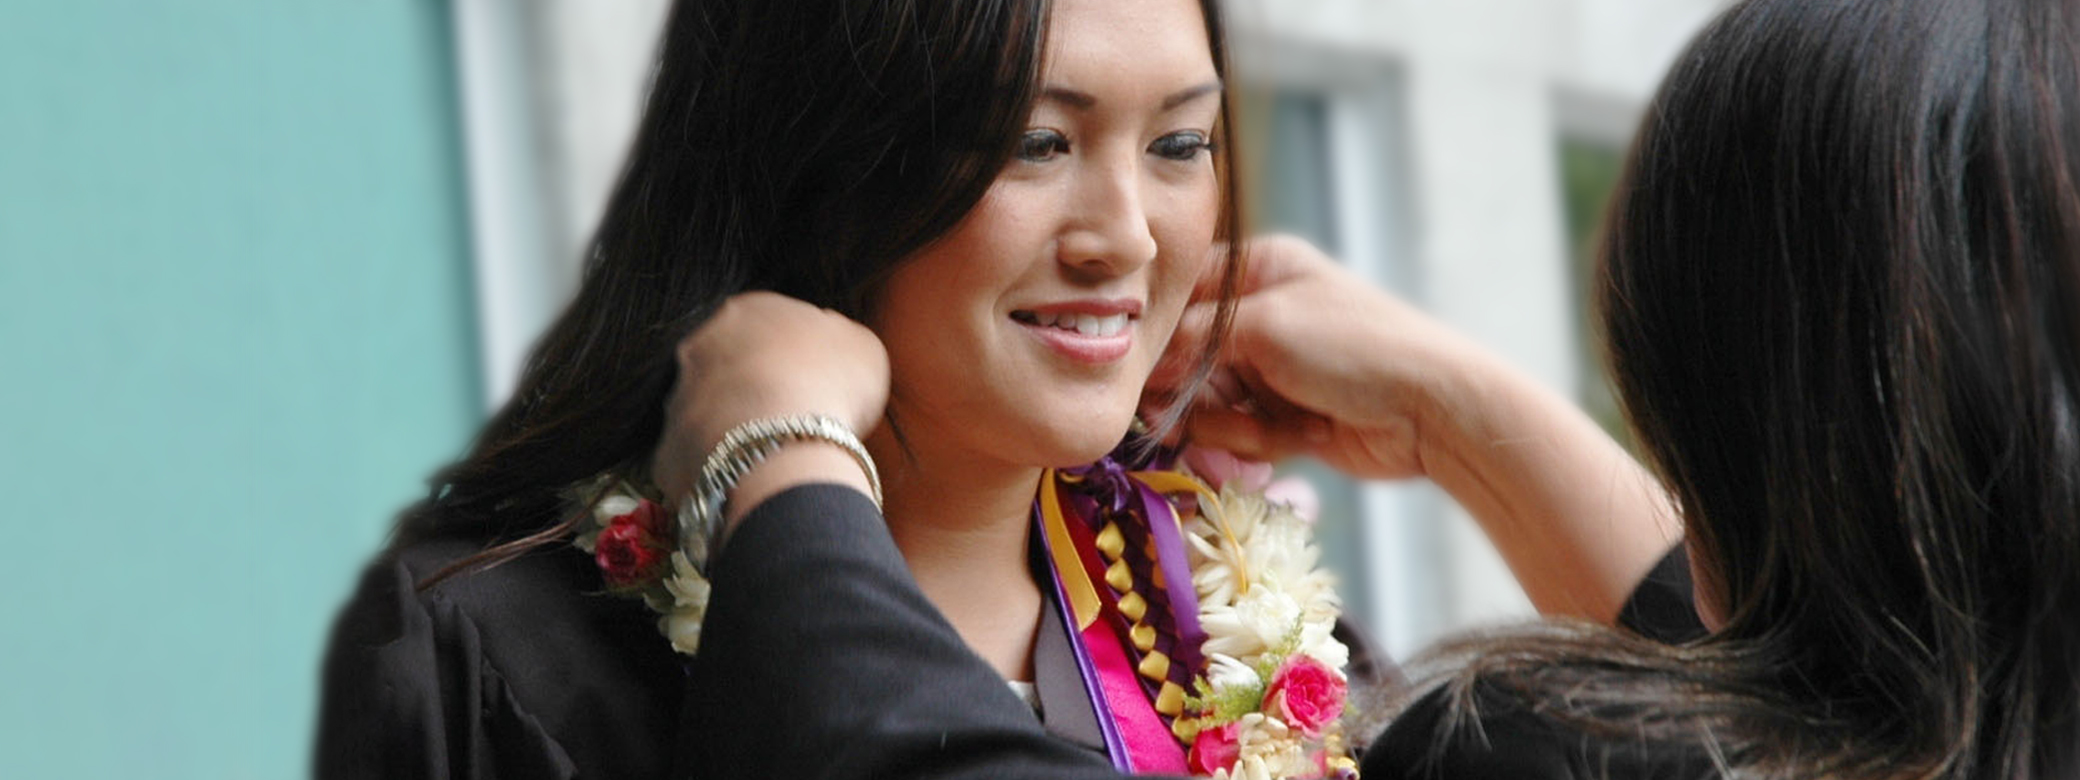 A graduation lei is being placed on a student.